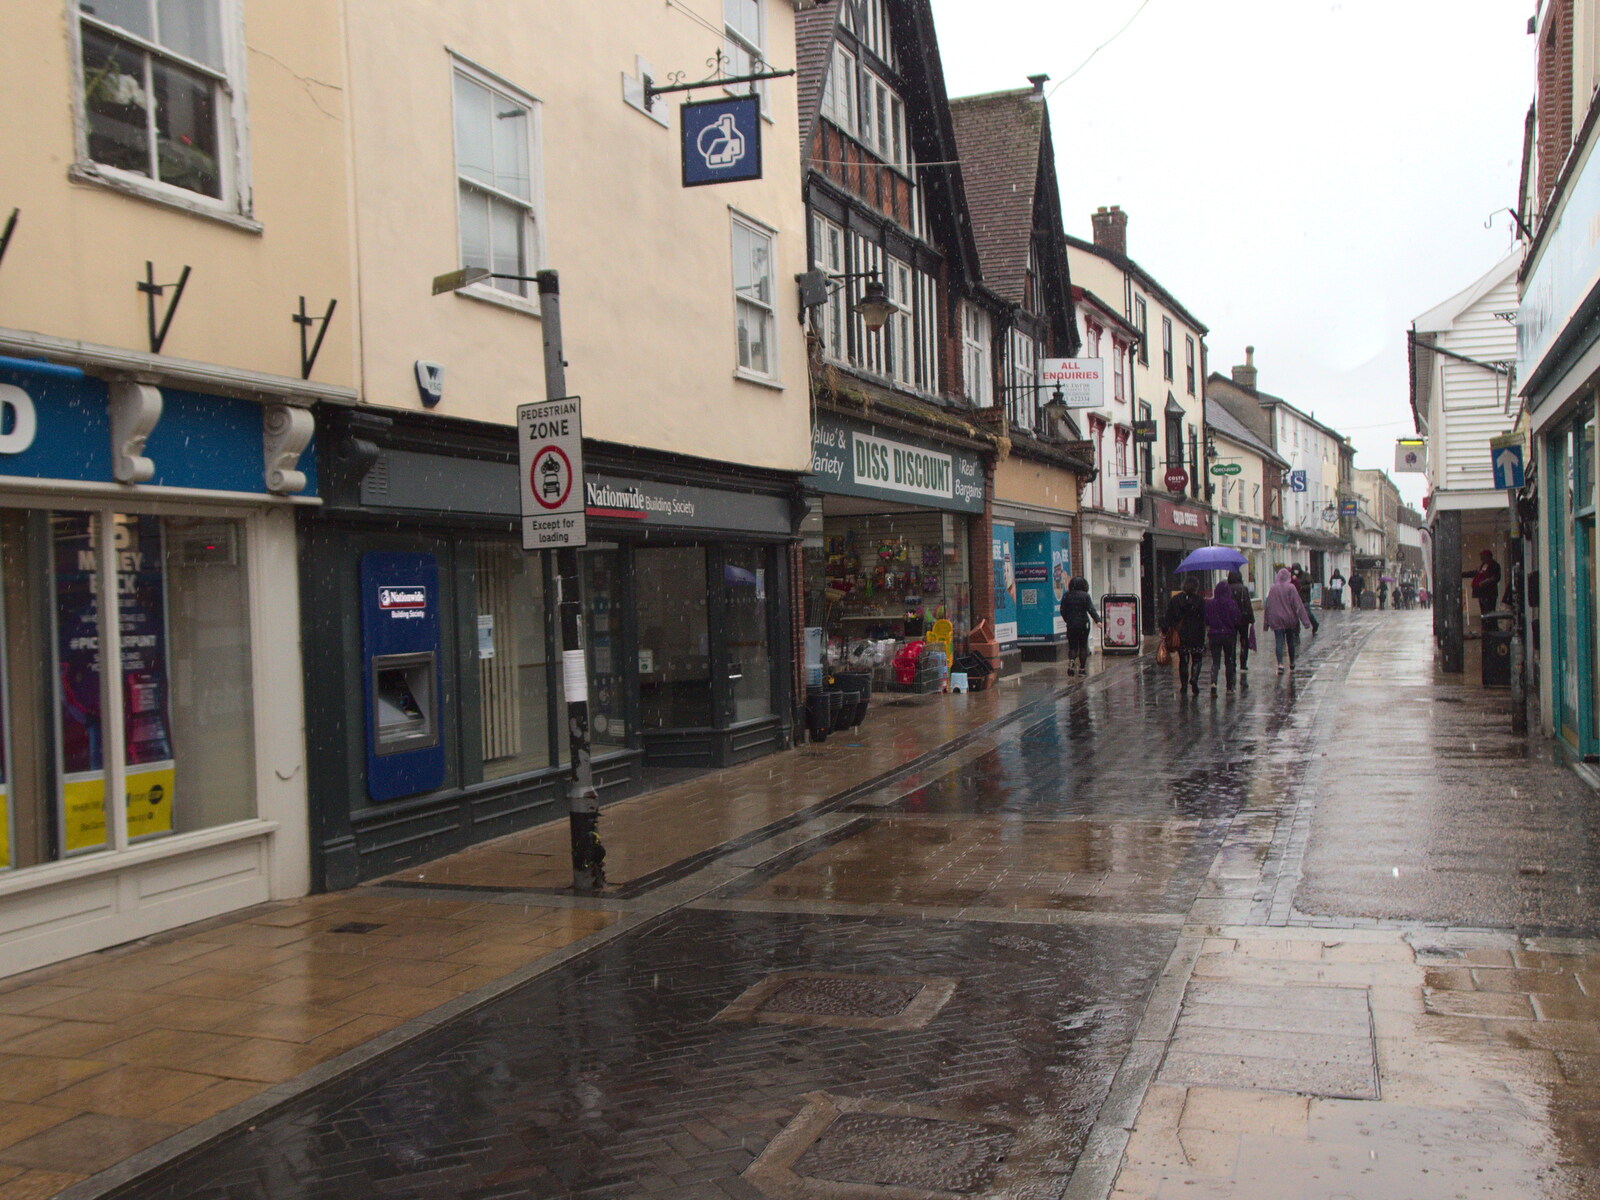 A rainy Mere Street from A Vaccination Afternoon, Swaffham, Norfolk - 9th May 2021